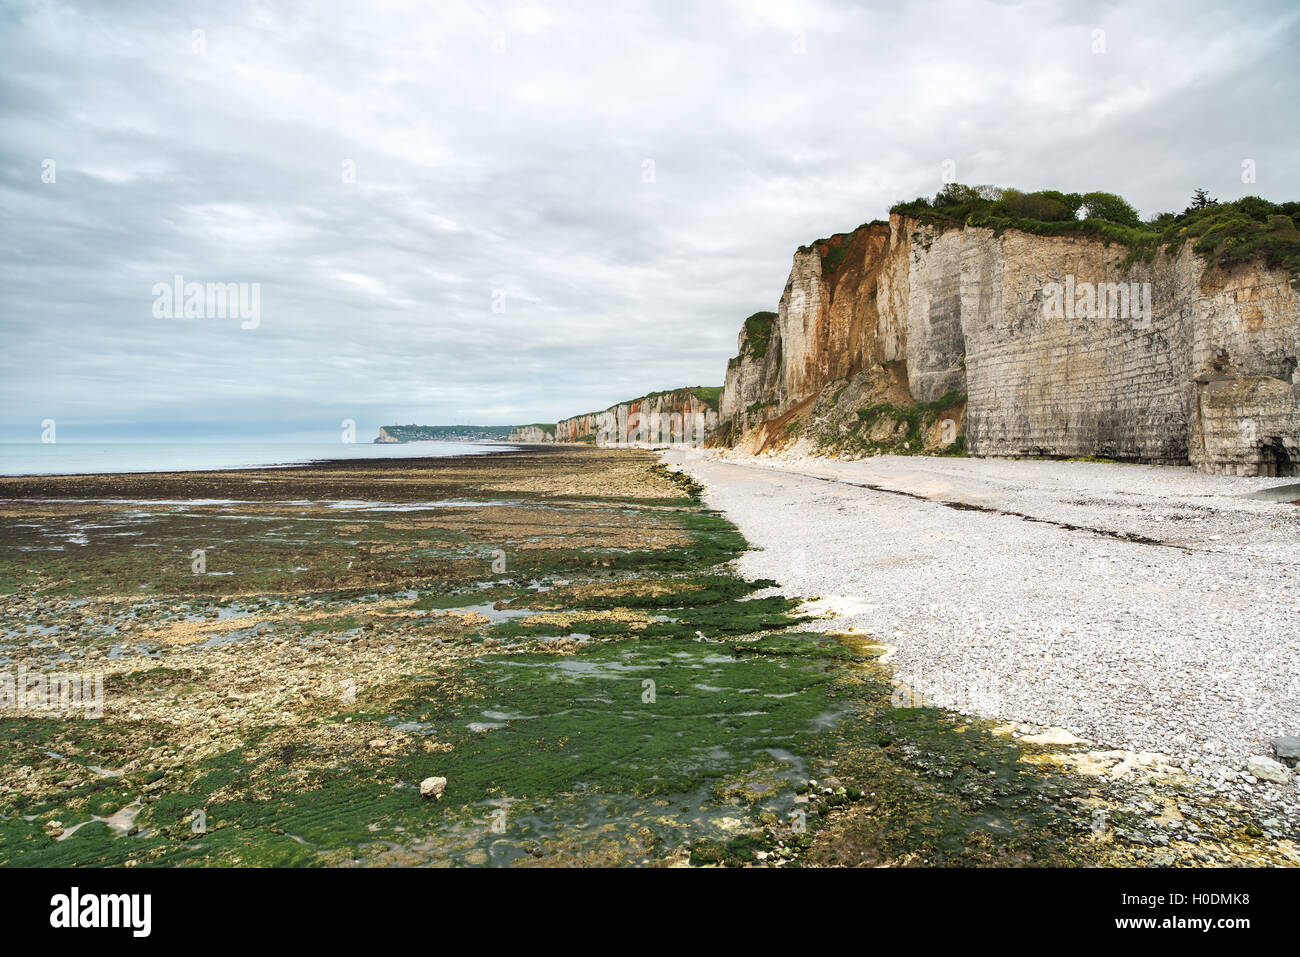 Yport and Fecamp, Normandy. Beach, cliff and rocks in low tide ocean. France, Europe. Stock Photo